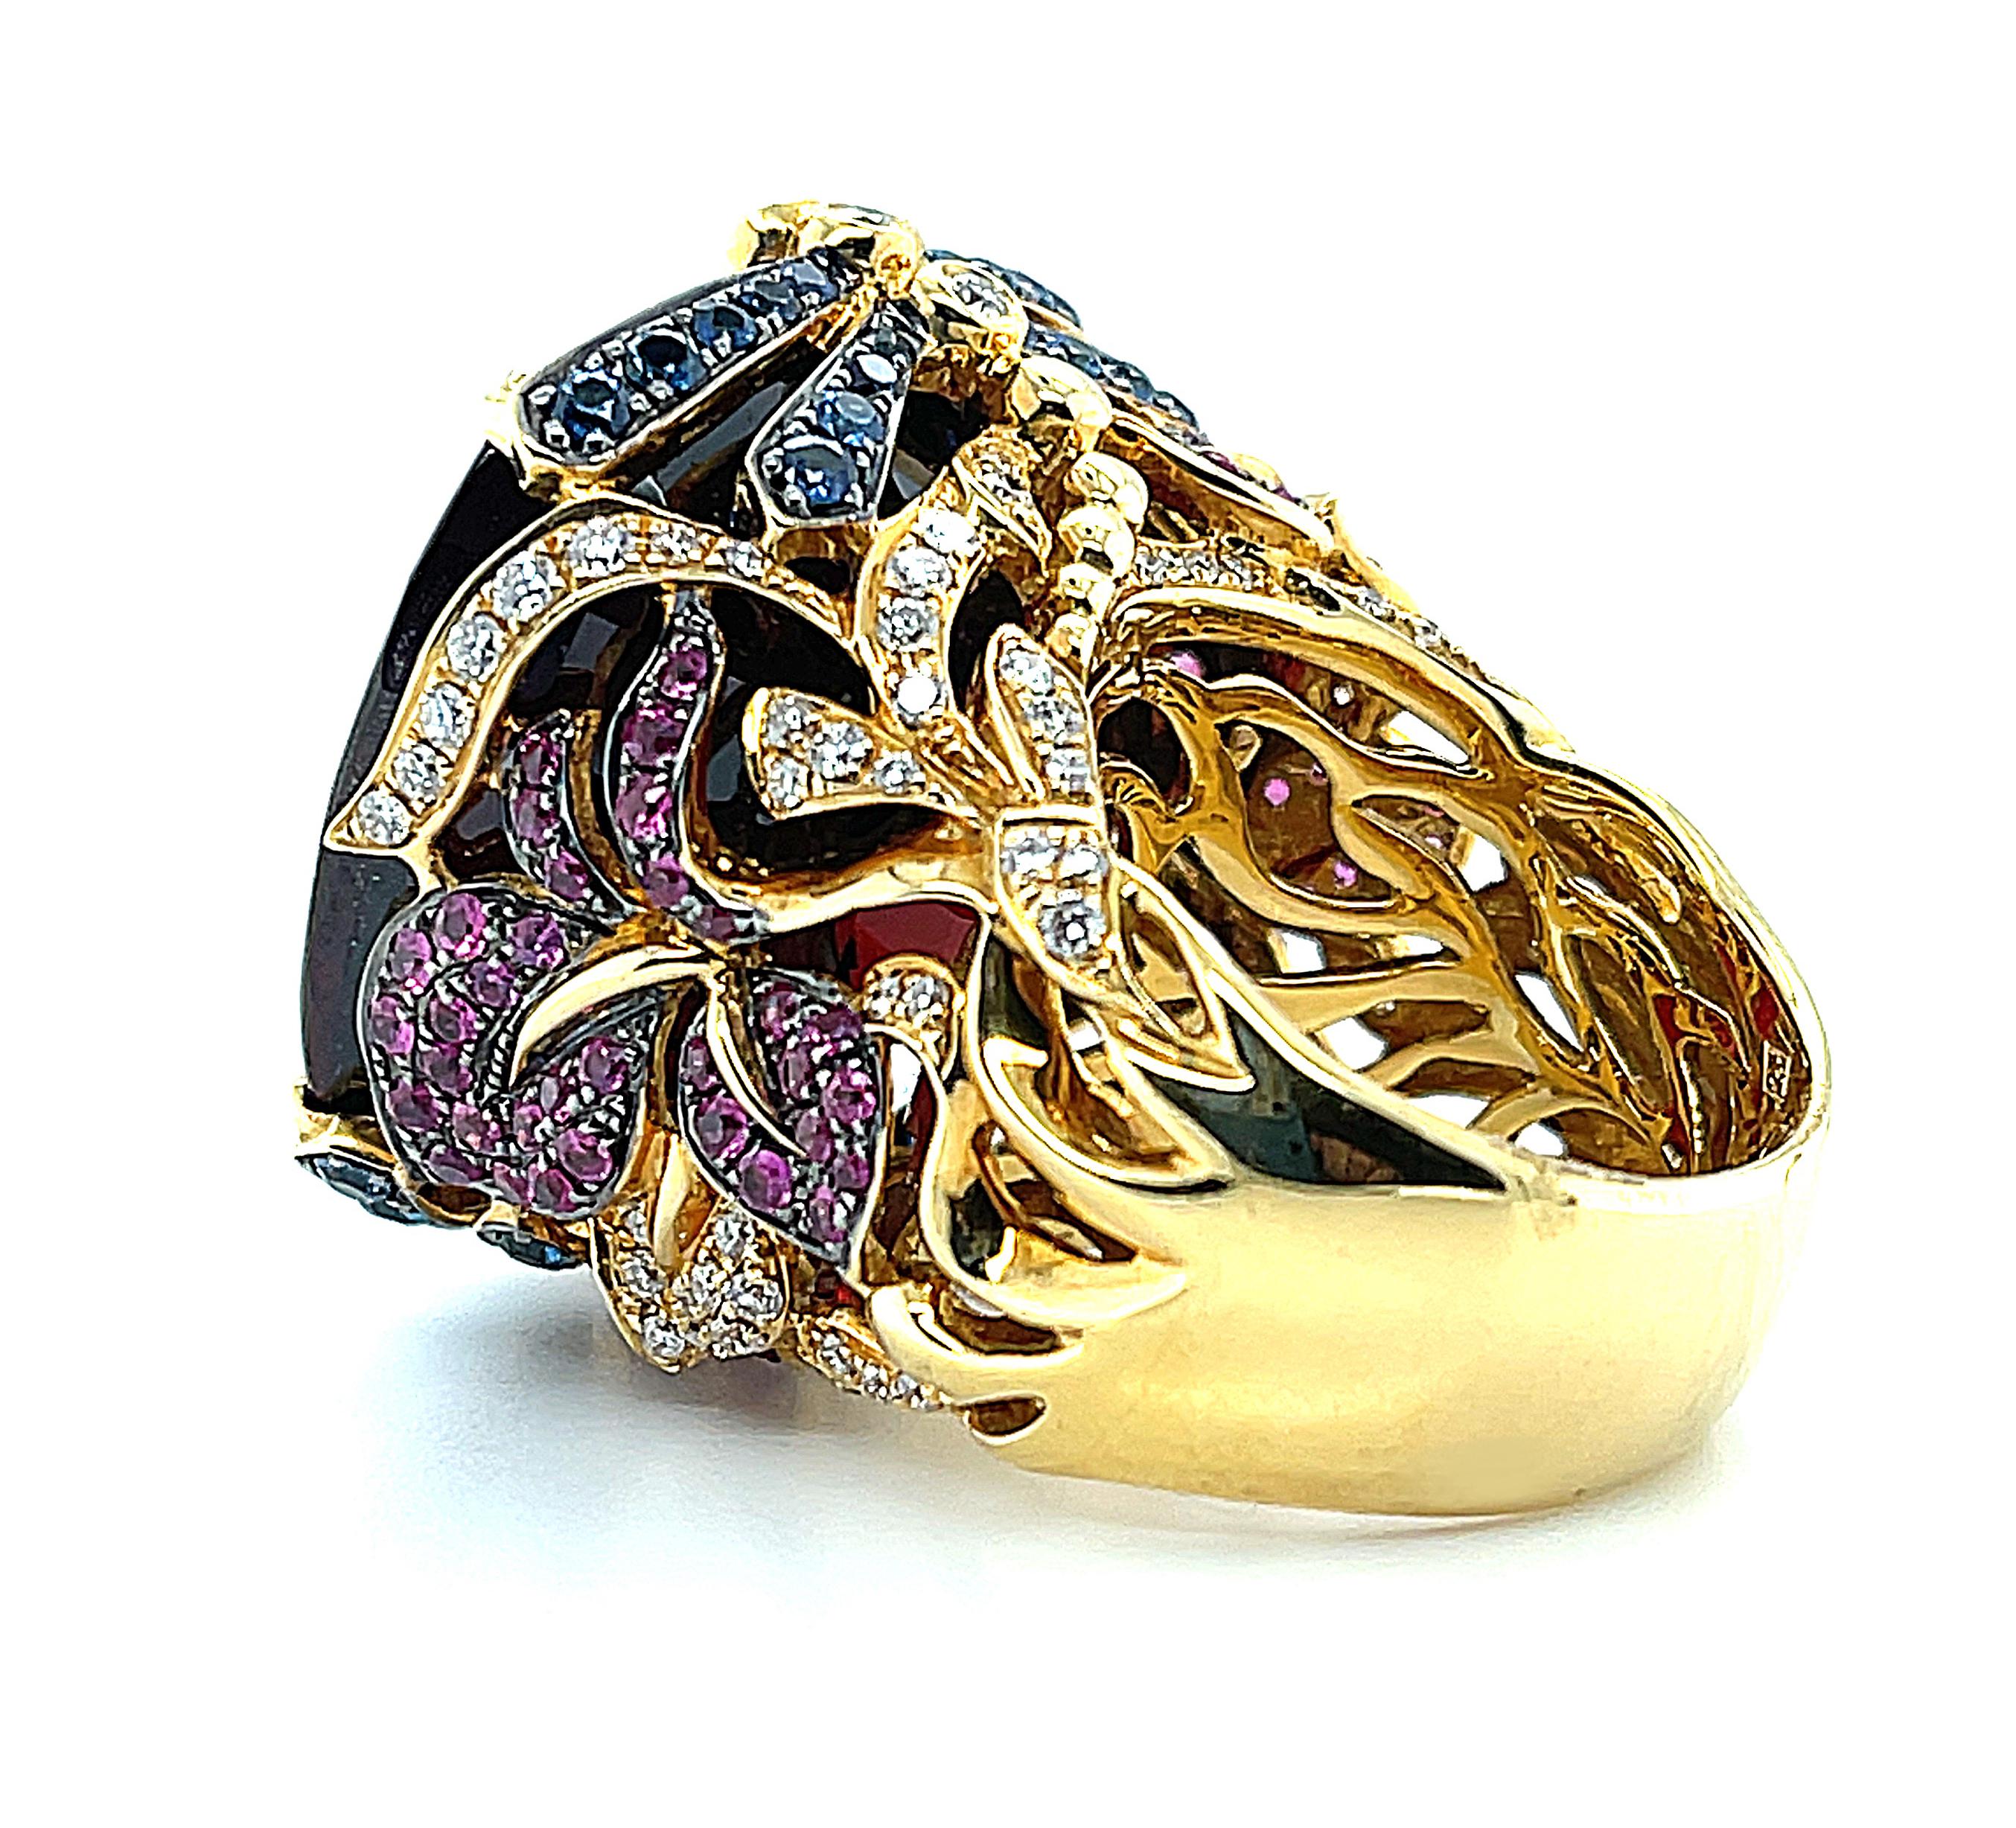 Cushion Cut 71 Carat Garnet, Ruby, Sapphire and Diamond Cocktail Ring in 18k Yellow Gold